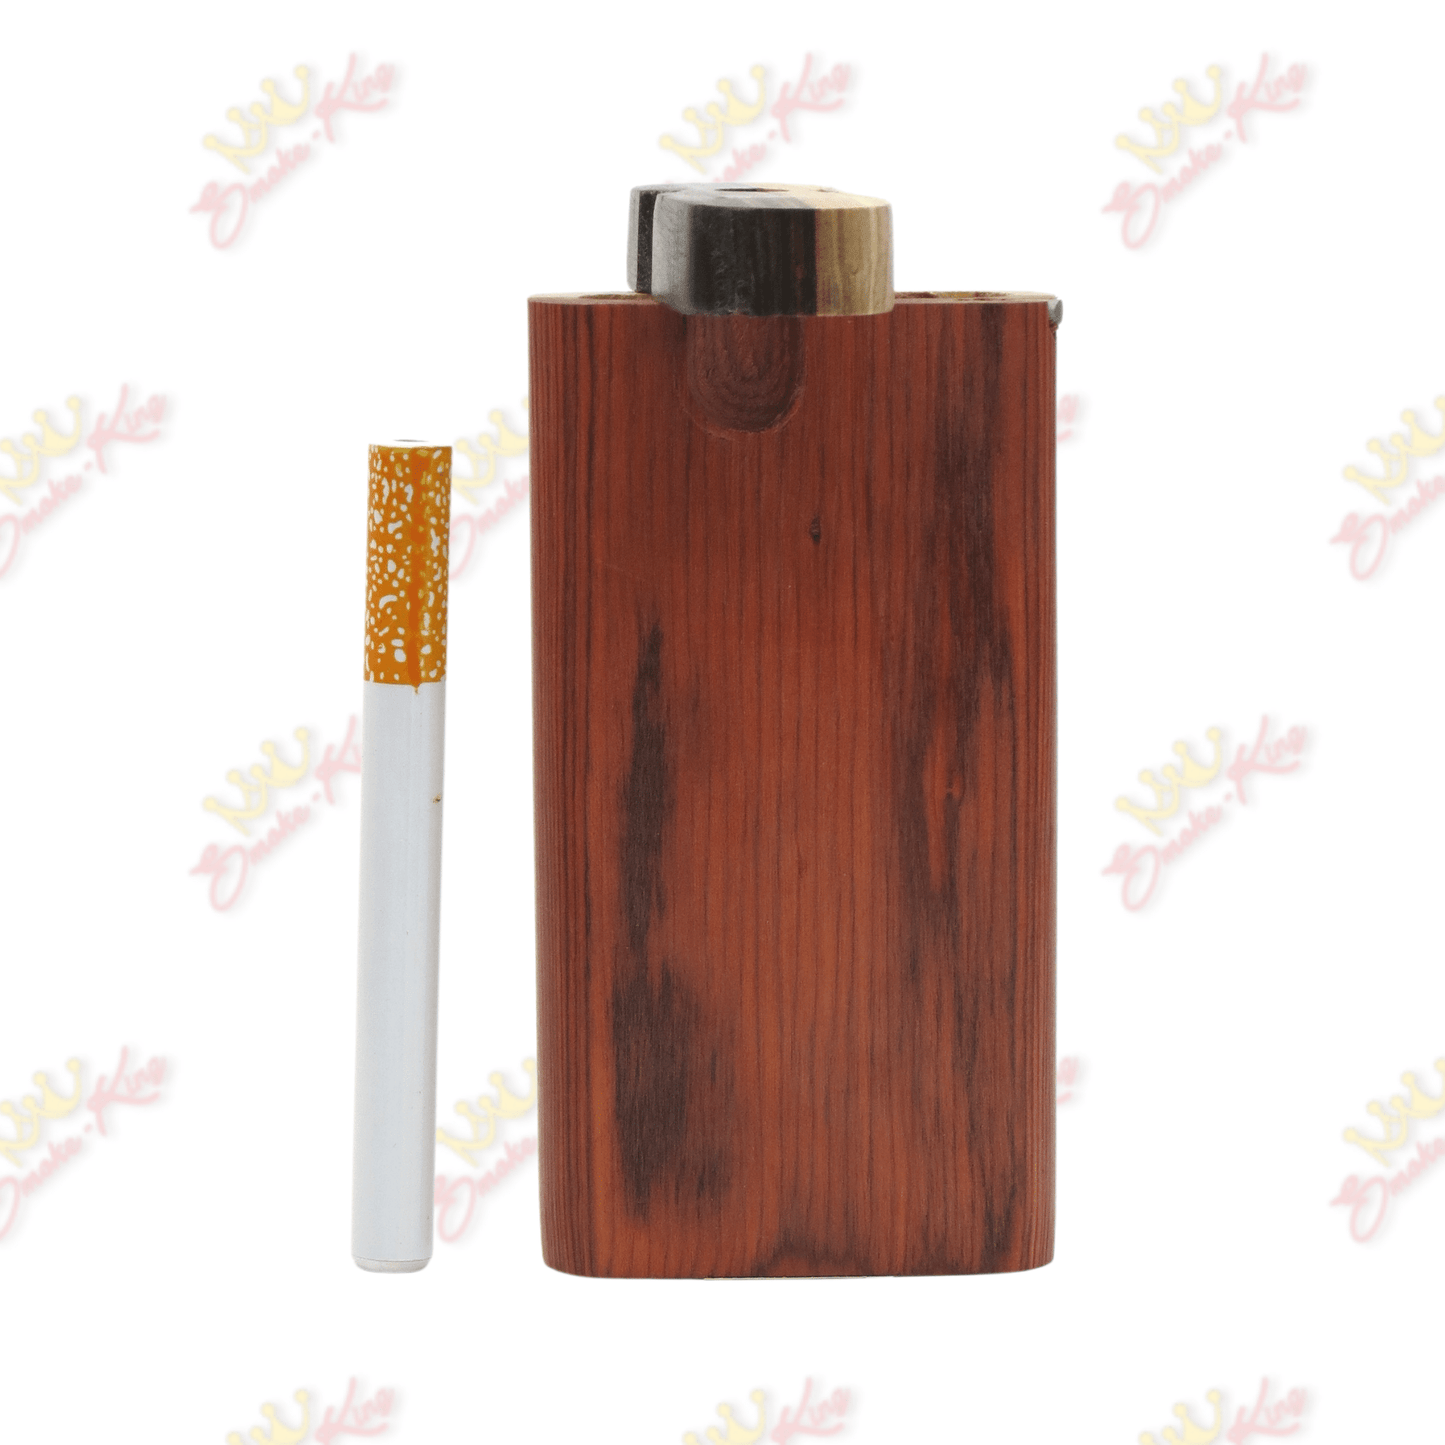 Brown & Cream wood dugout one hitter